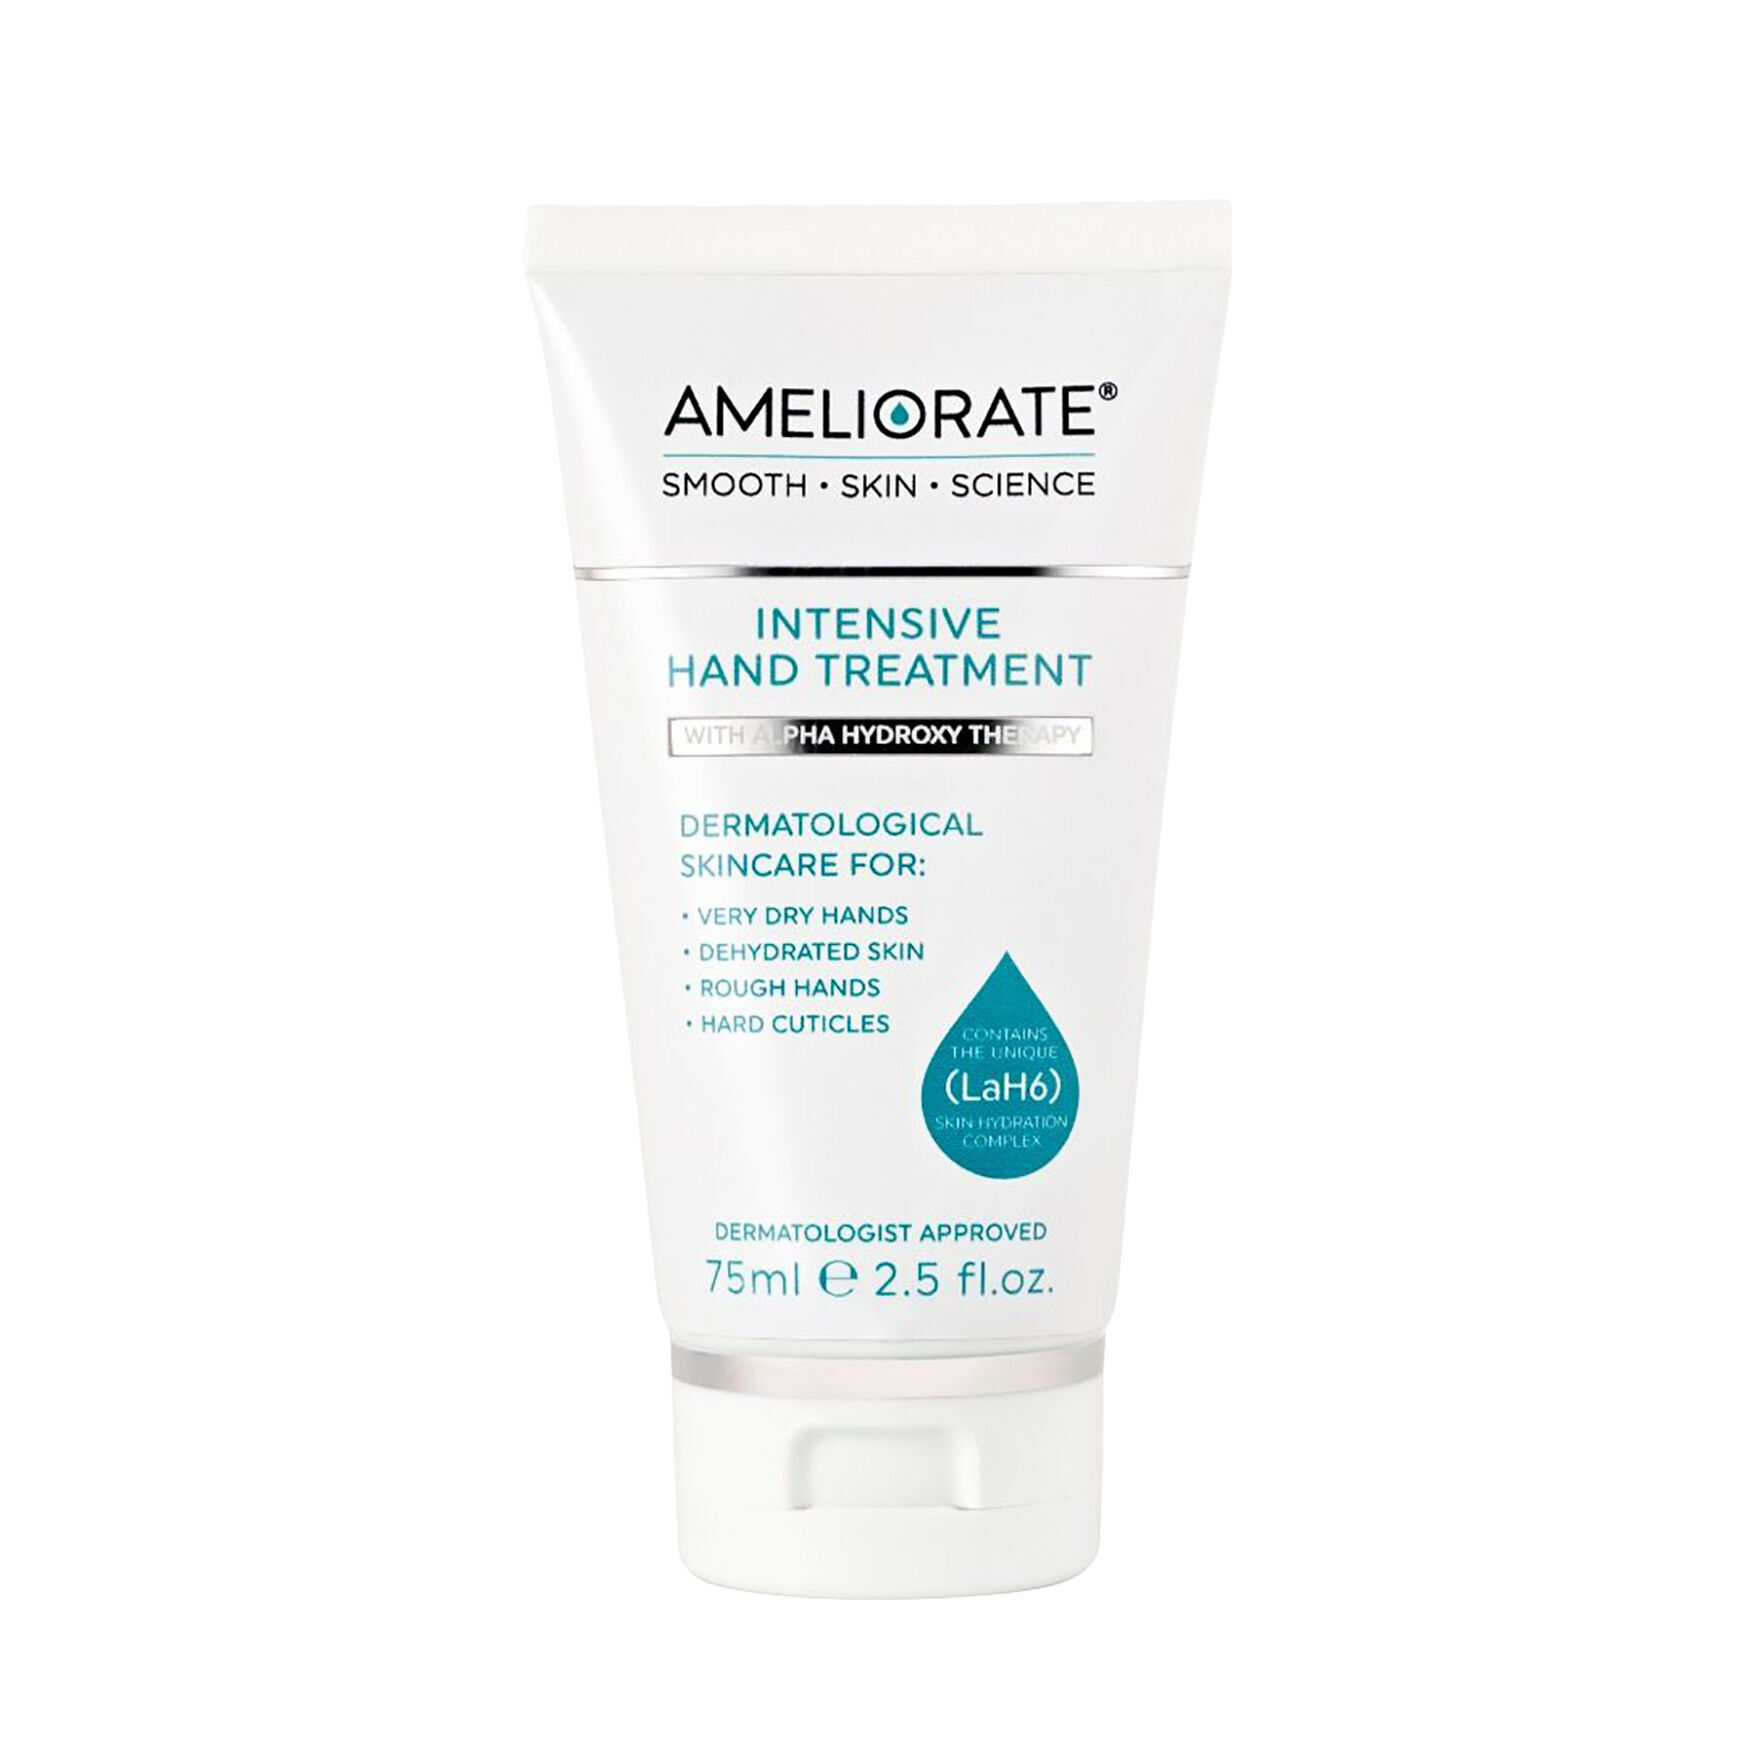 AMELIORATE - Intensive Hand Treatment by Ameliorate